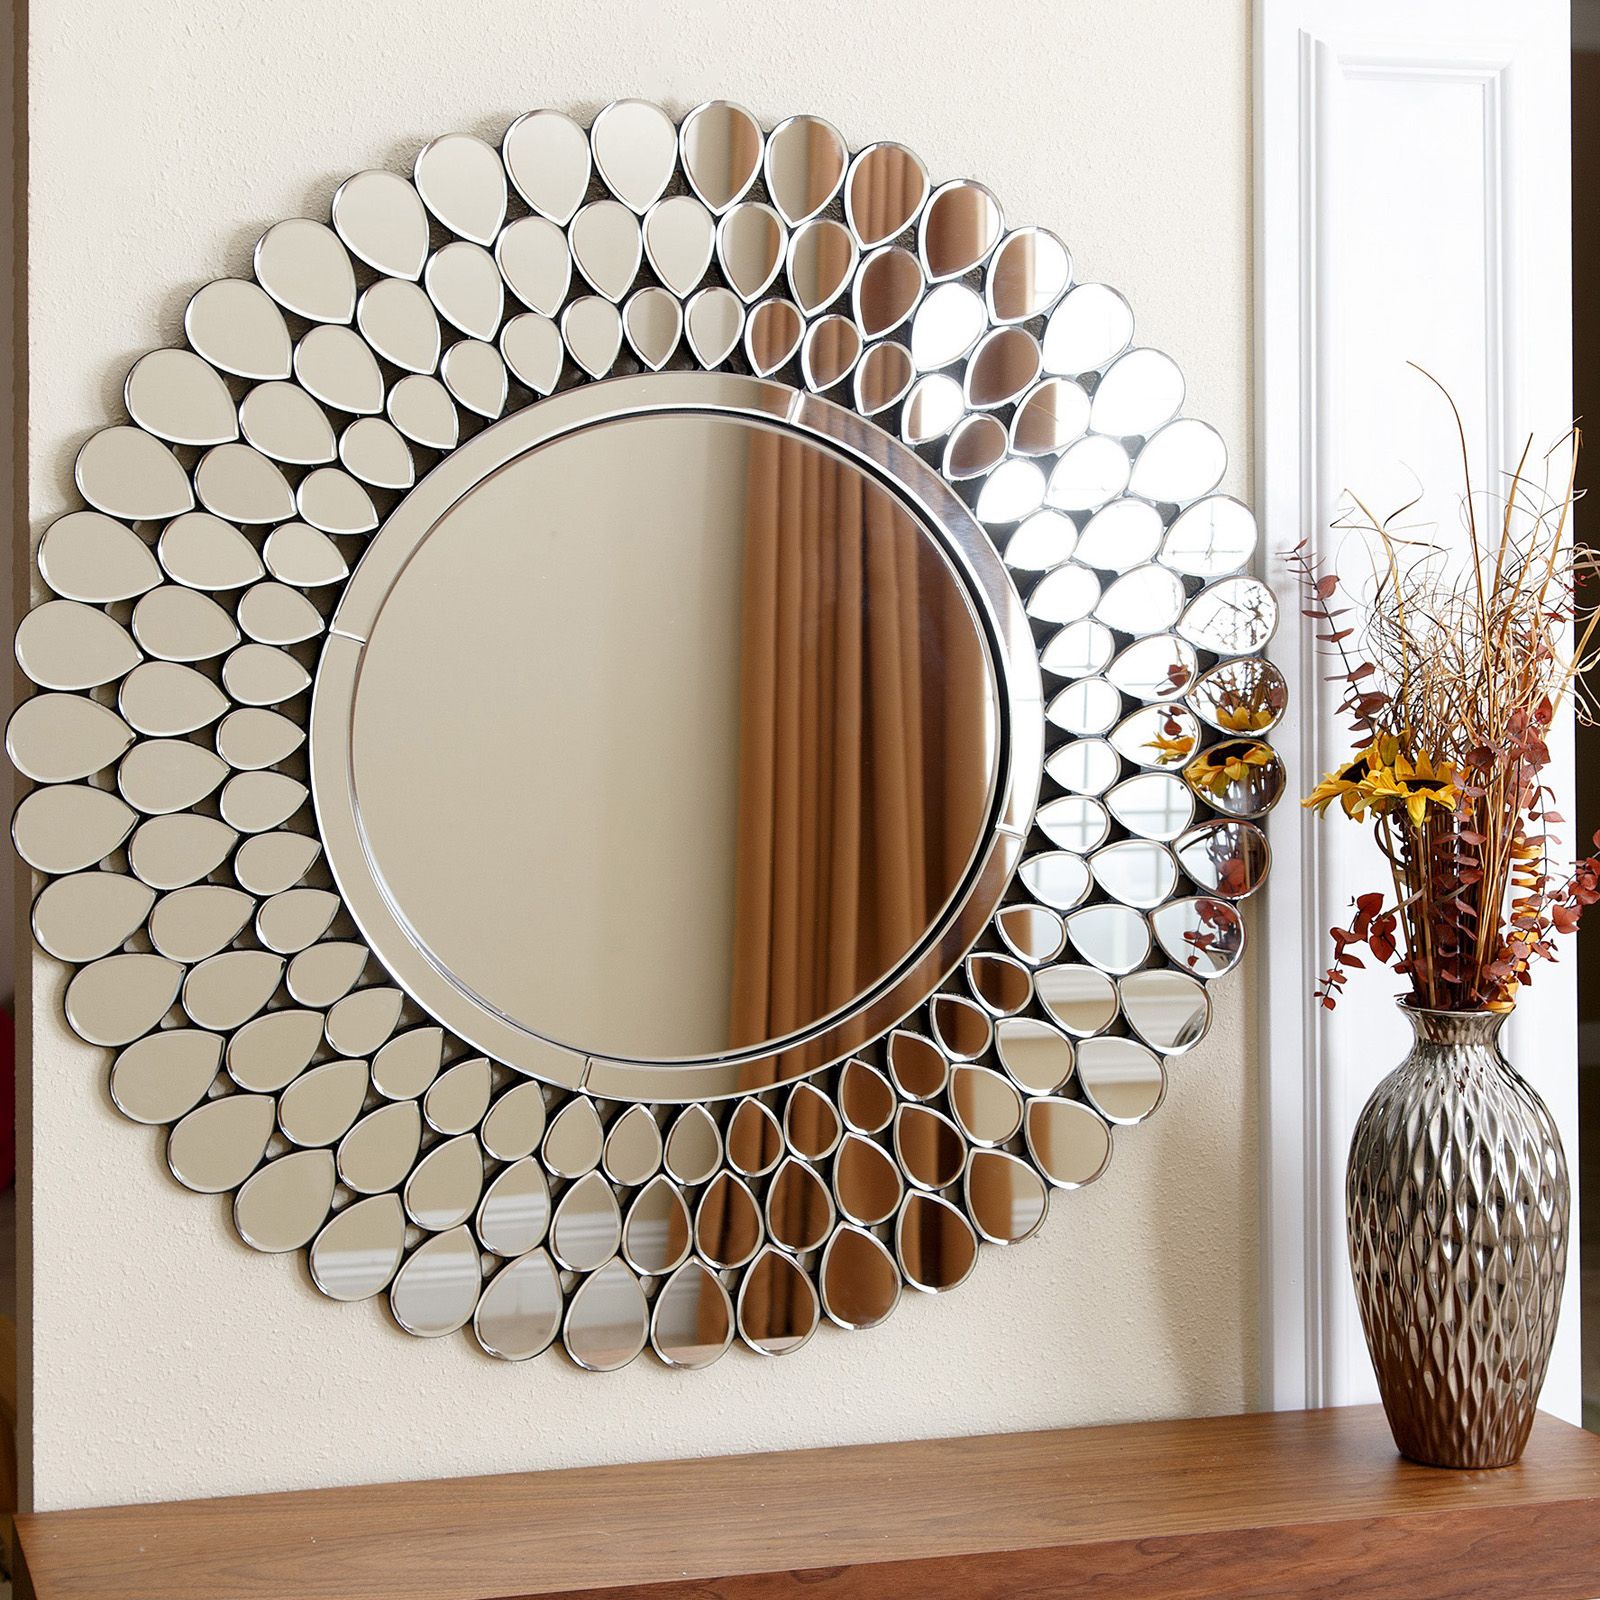 Abbyson Living Reagan Round Wall Mirror – Mirrors At Hayneedle In Jagged Edge Round Wall Mirrors (View 14 of 15)